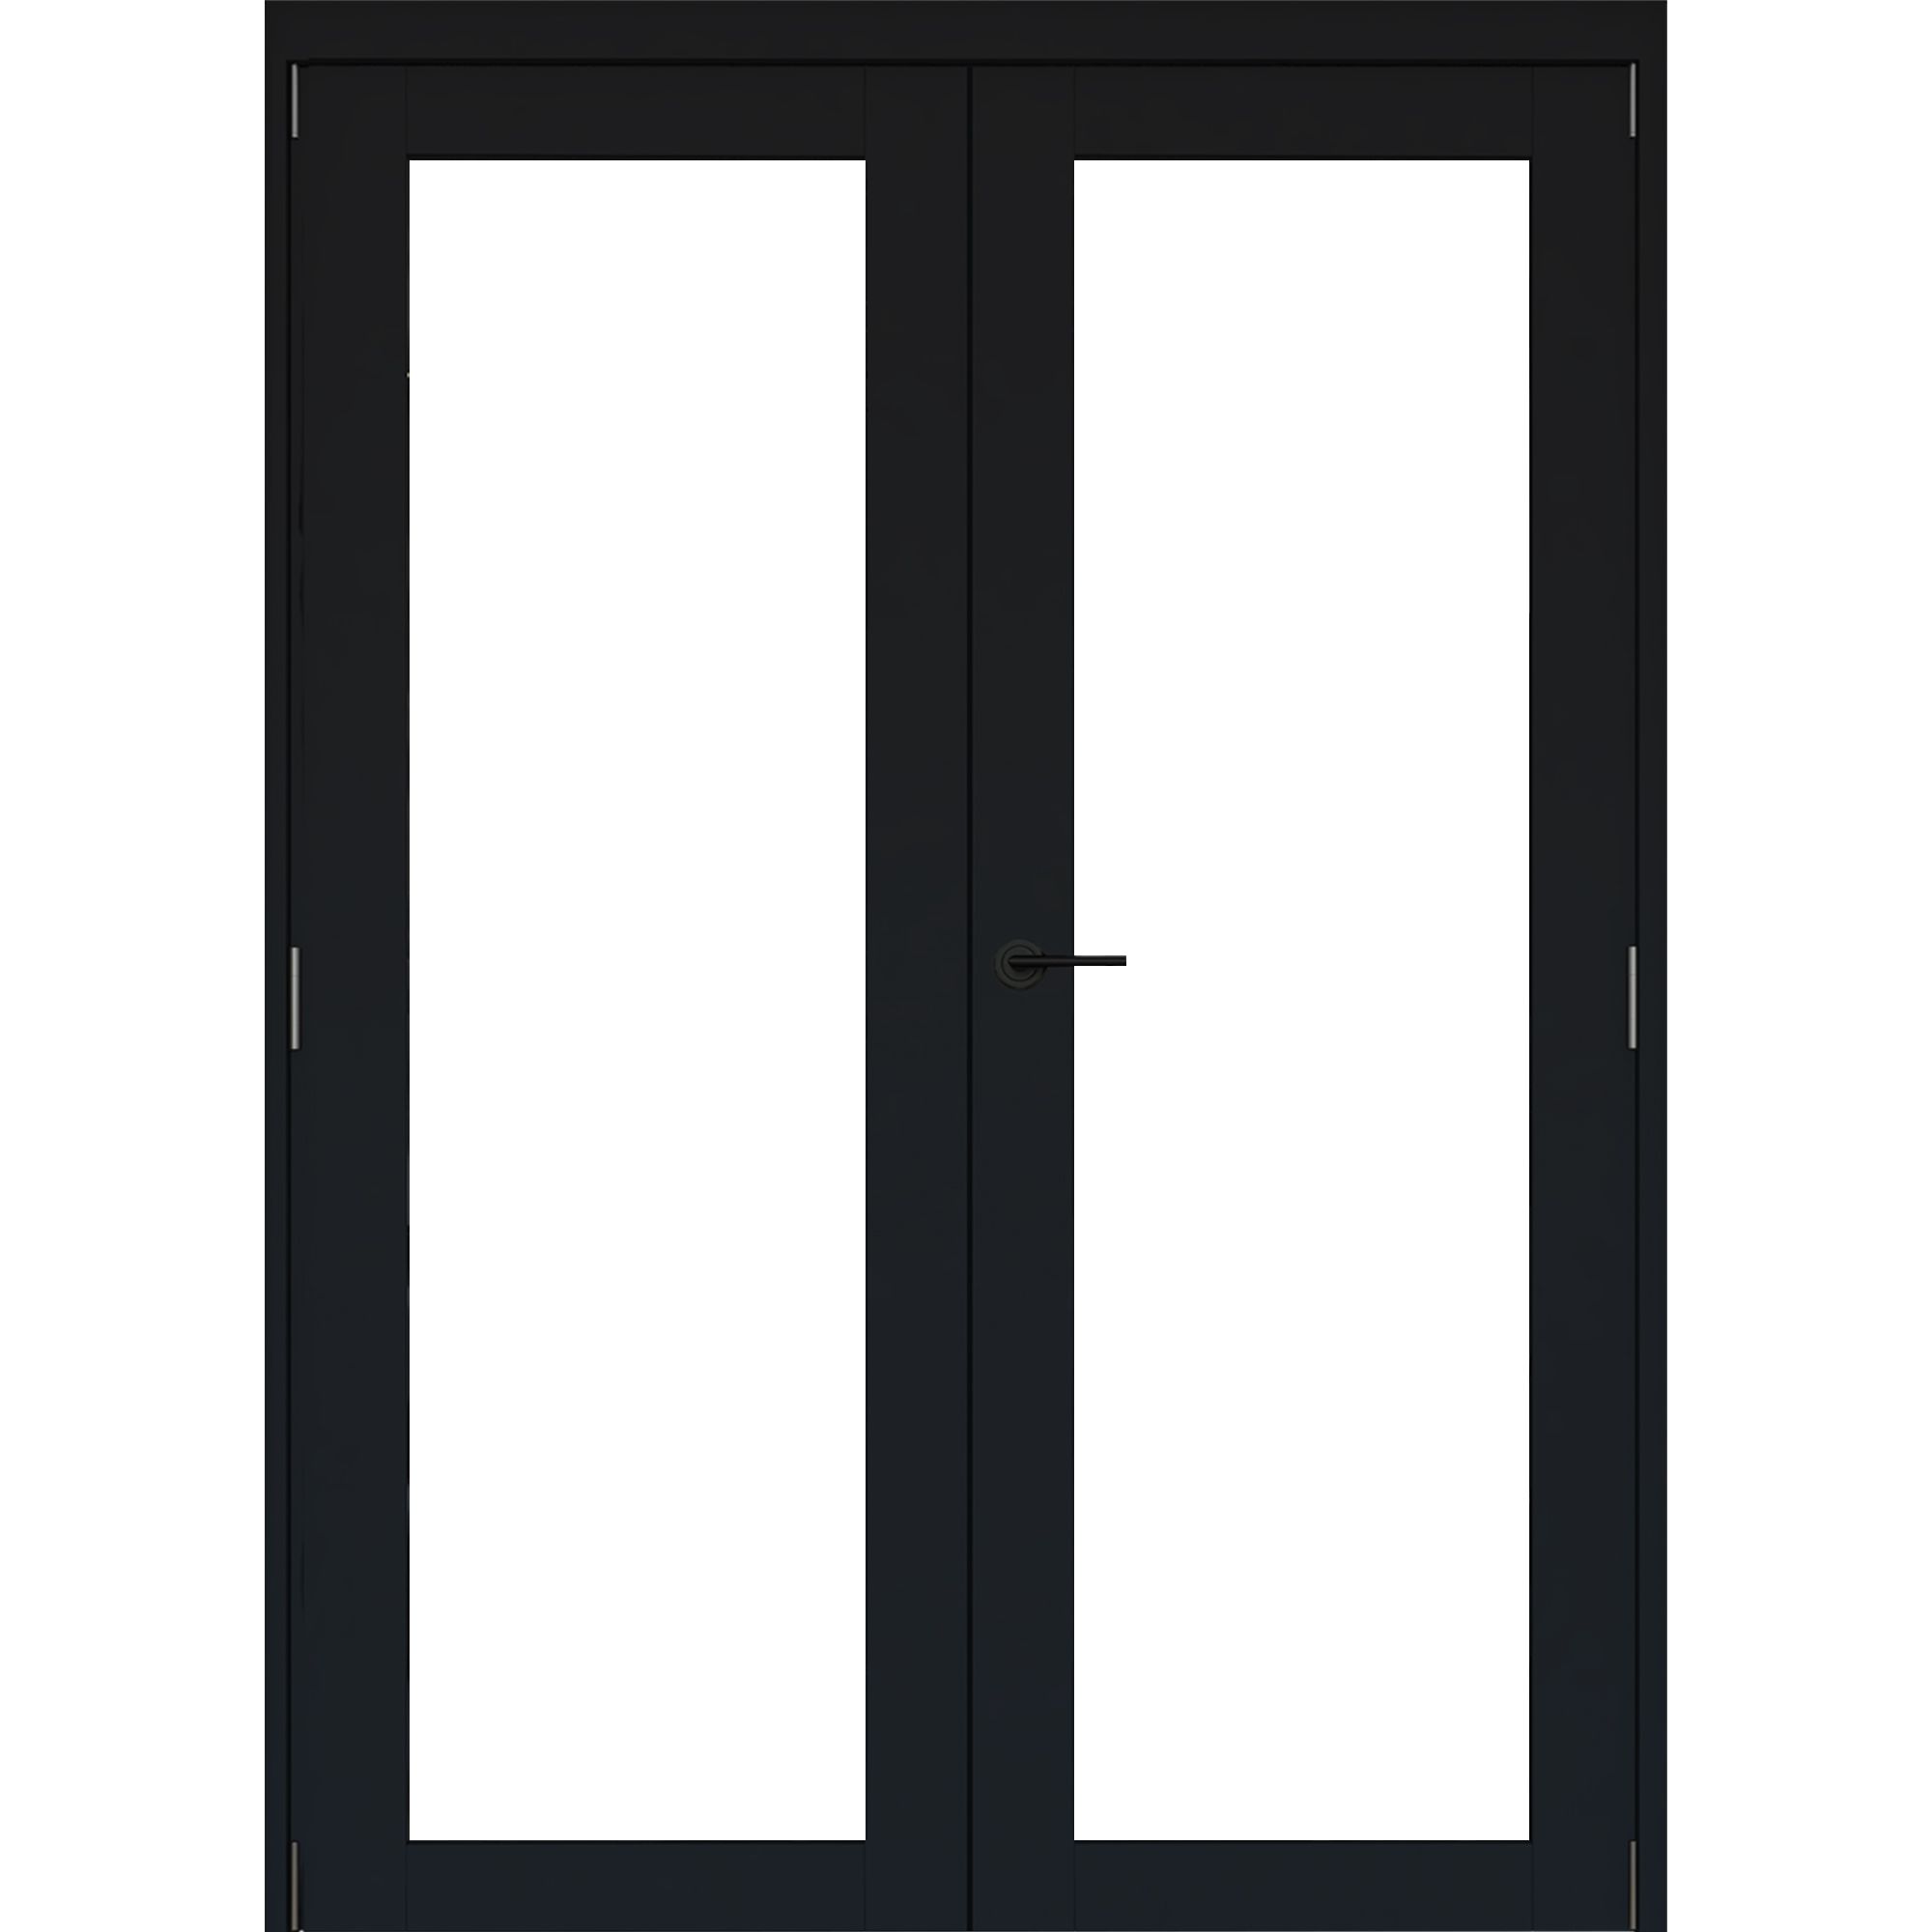 1 panel 1 Lite Clear Fully glazed Timber Black Internal French door set 2017mm x 133mm x 1293mm - Fully Finished